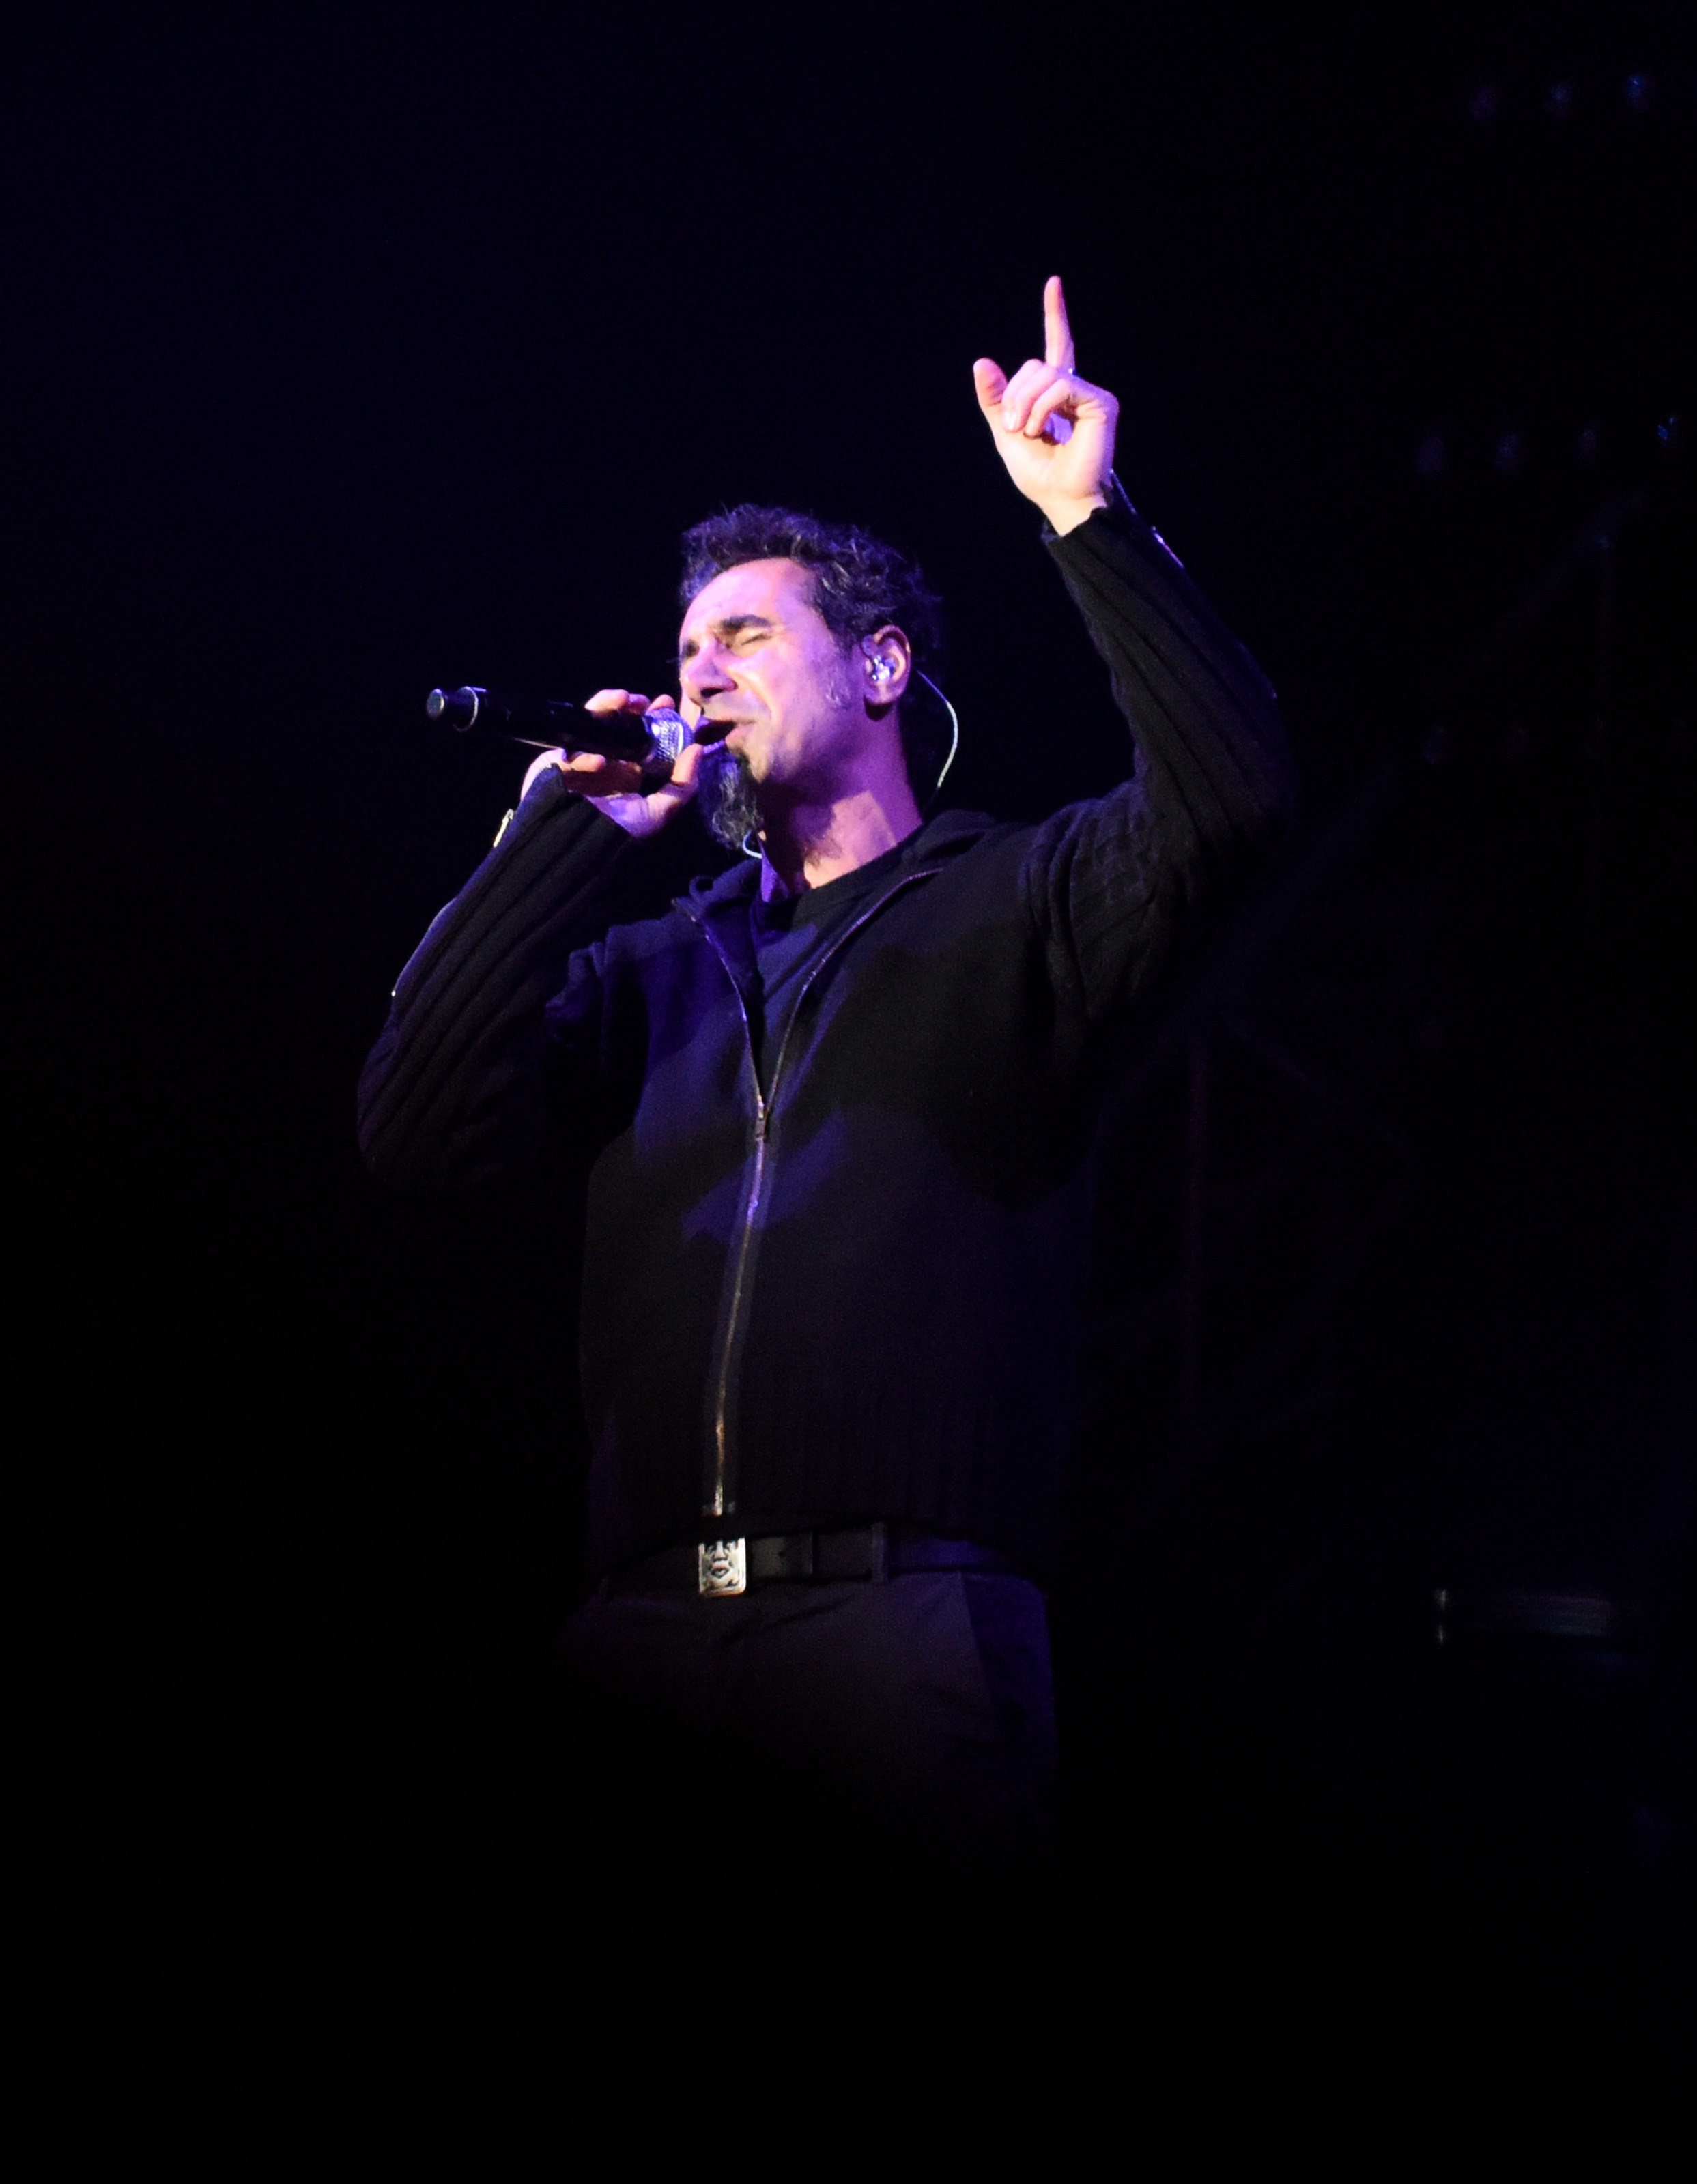 Serj Tankian of the hard rock band System of a Down performs at Yerevan's Republic Square on April 23, 2015. (Karen Minasyan—AFP/Getty Images)